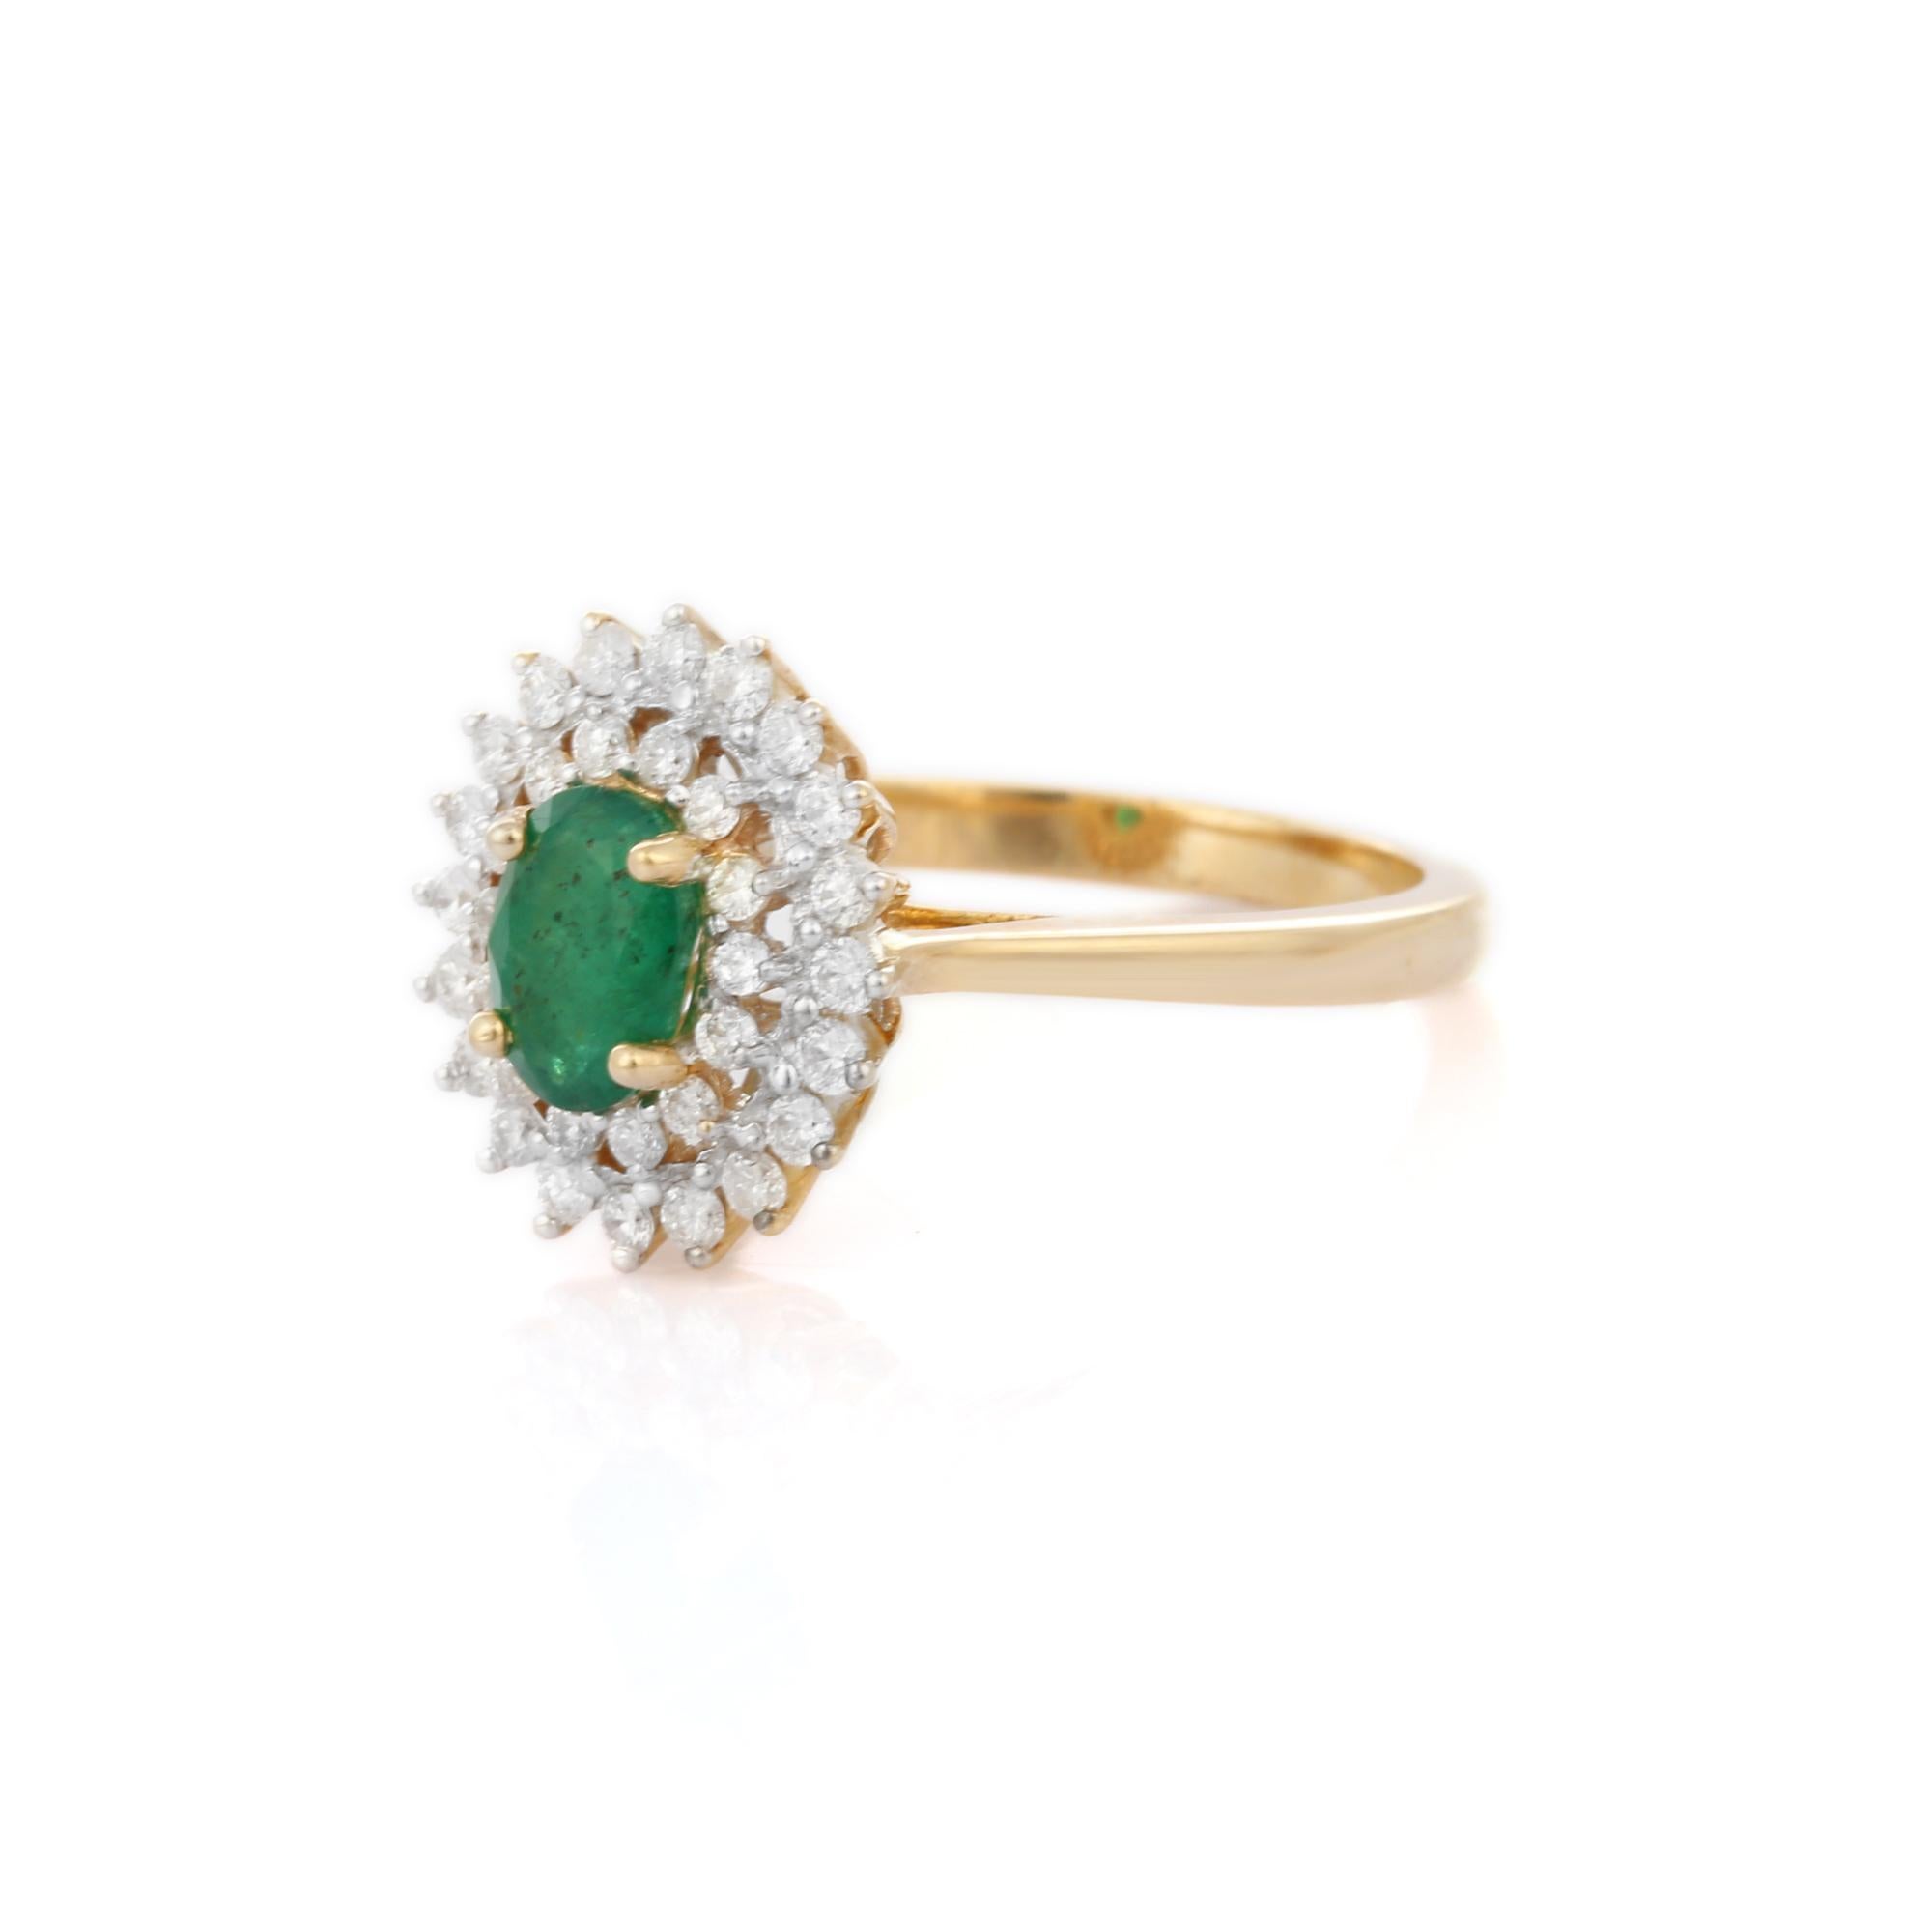 For Sale:  14K Yellow Gold Designer Oval Cut Emerald Ring Mounted with Layers of Diamonds 4